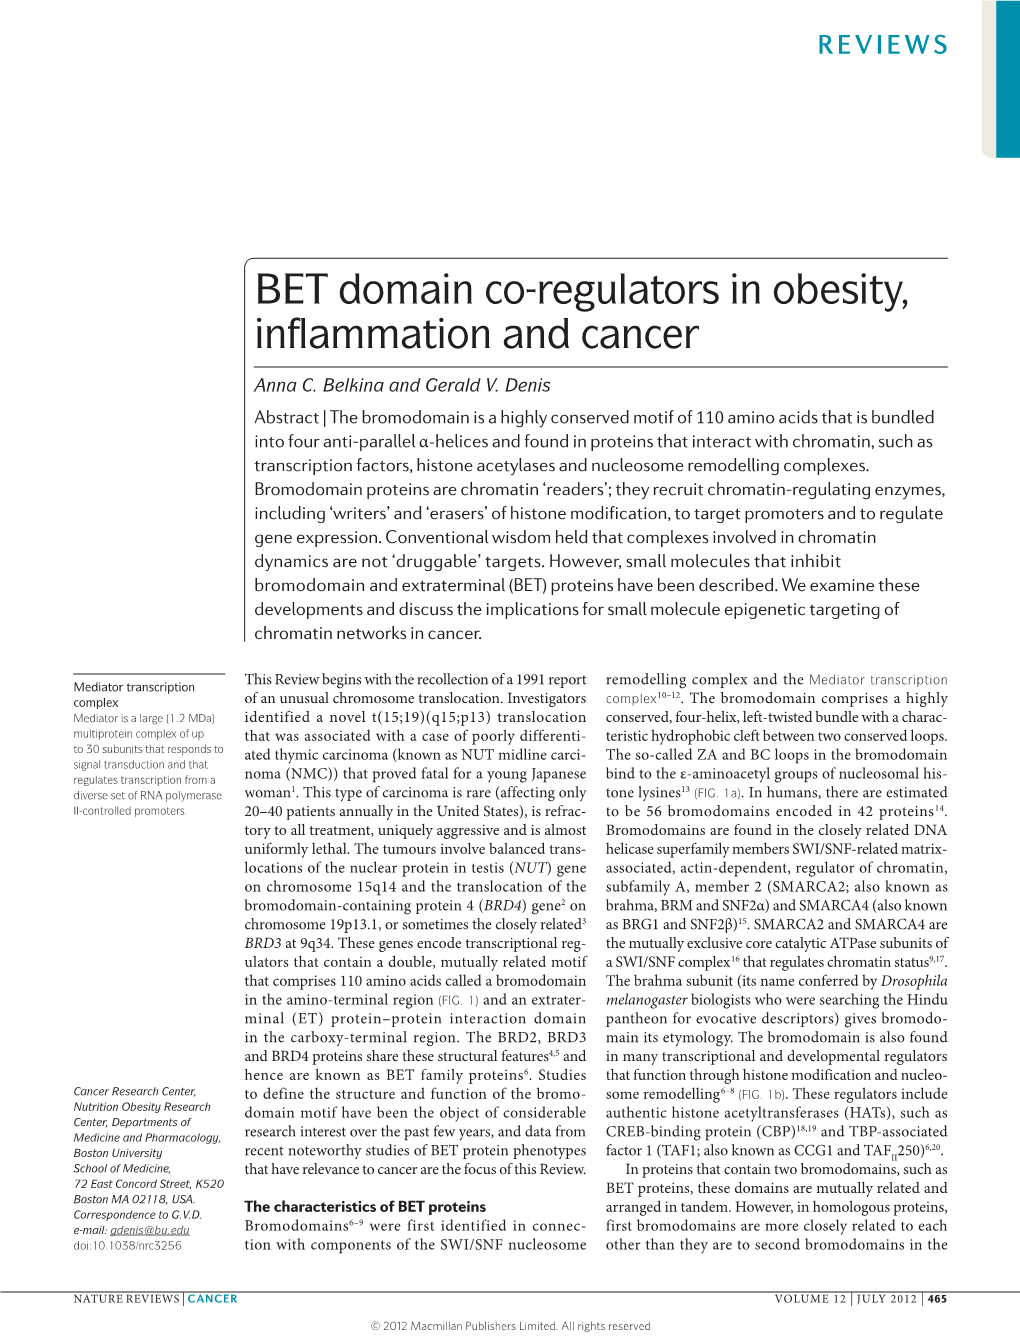 BET Domain Co-Regulators in Obesity, Inflammation and Cancer